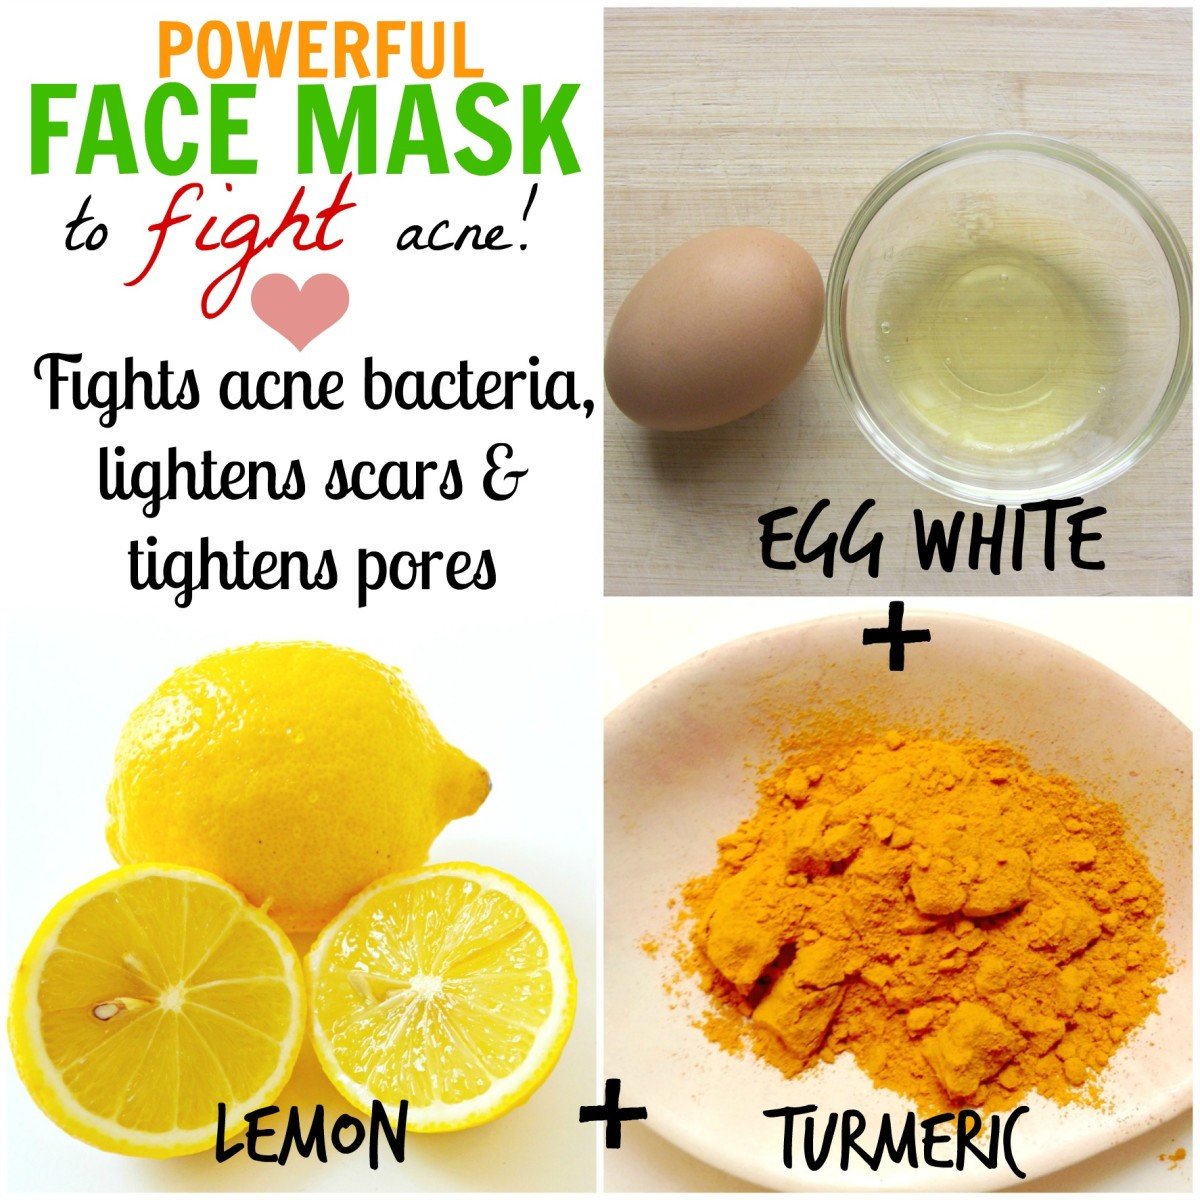 DIY Face Mask For Acne Scars
 DIY Homemade Face Masks for Acne How to Stop Pimples